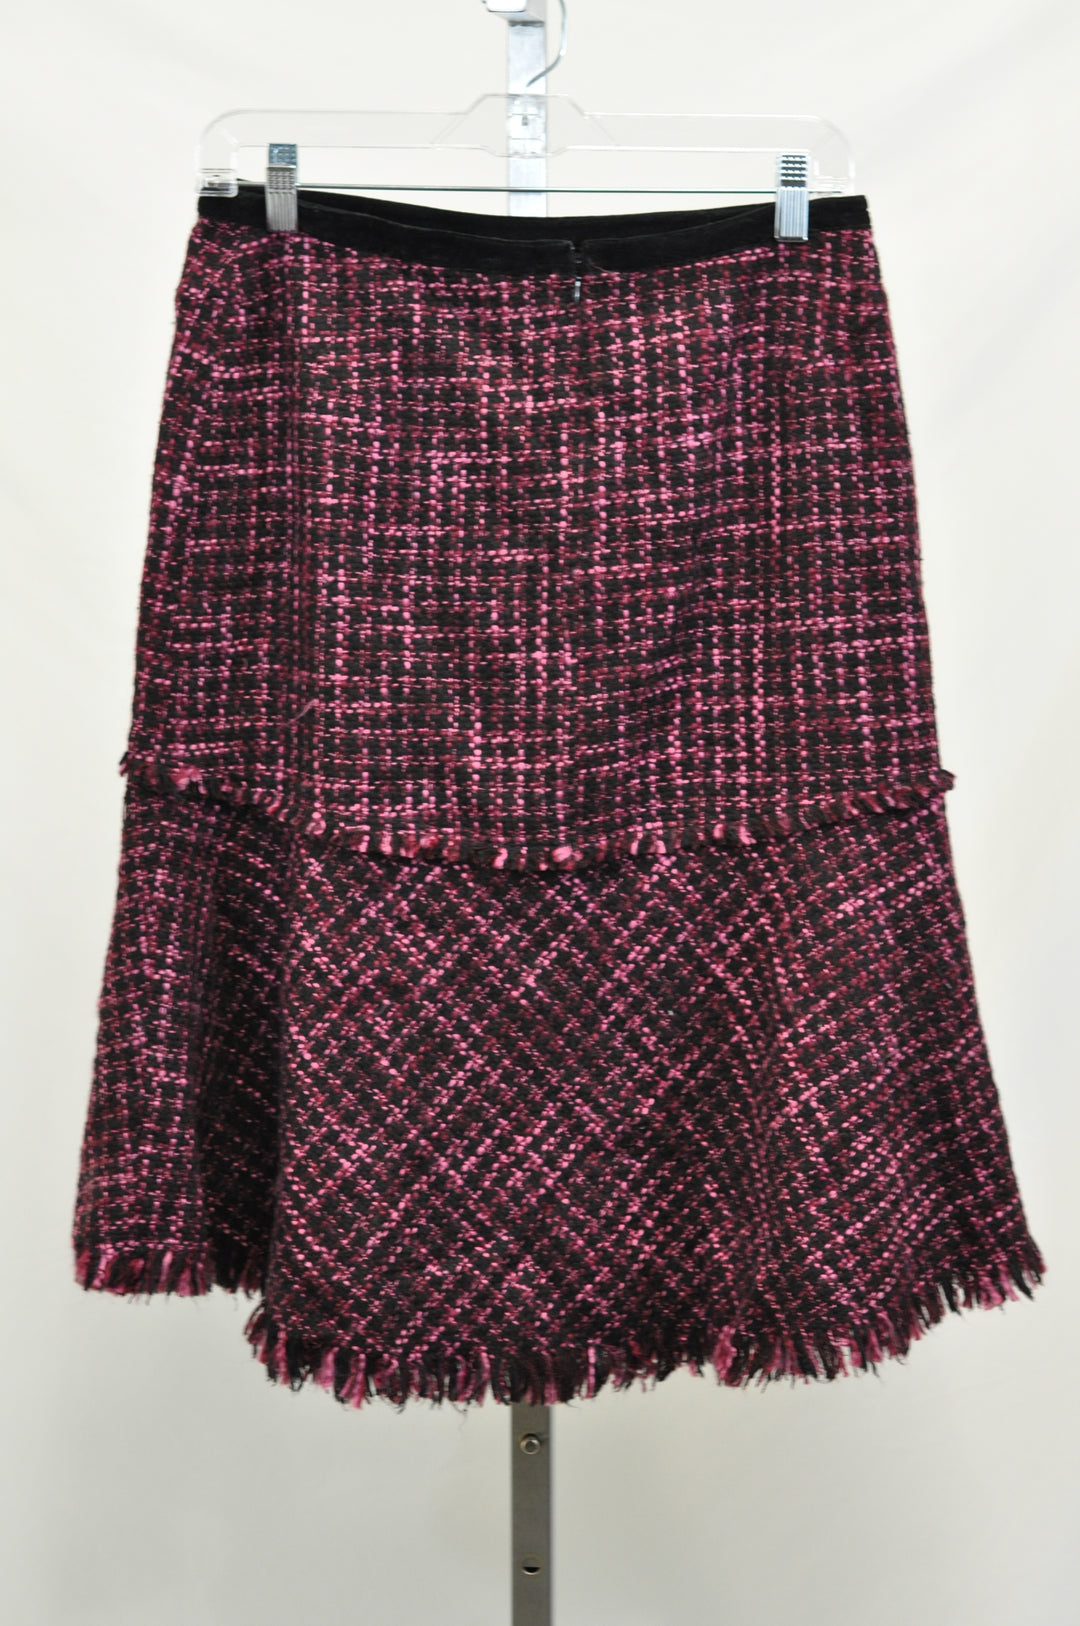 British Khaki Pink and Black Hounds Tooth Skirt - Size 6